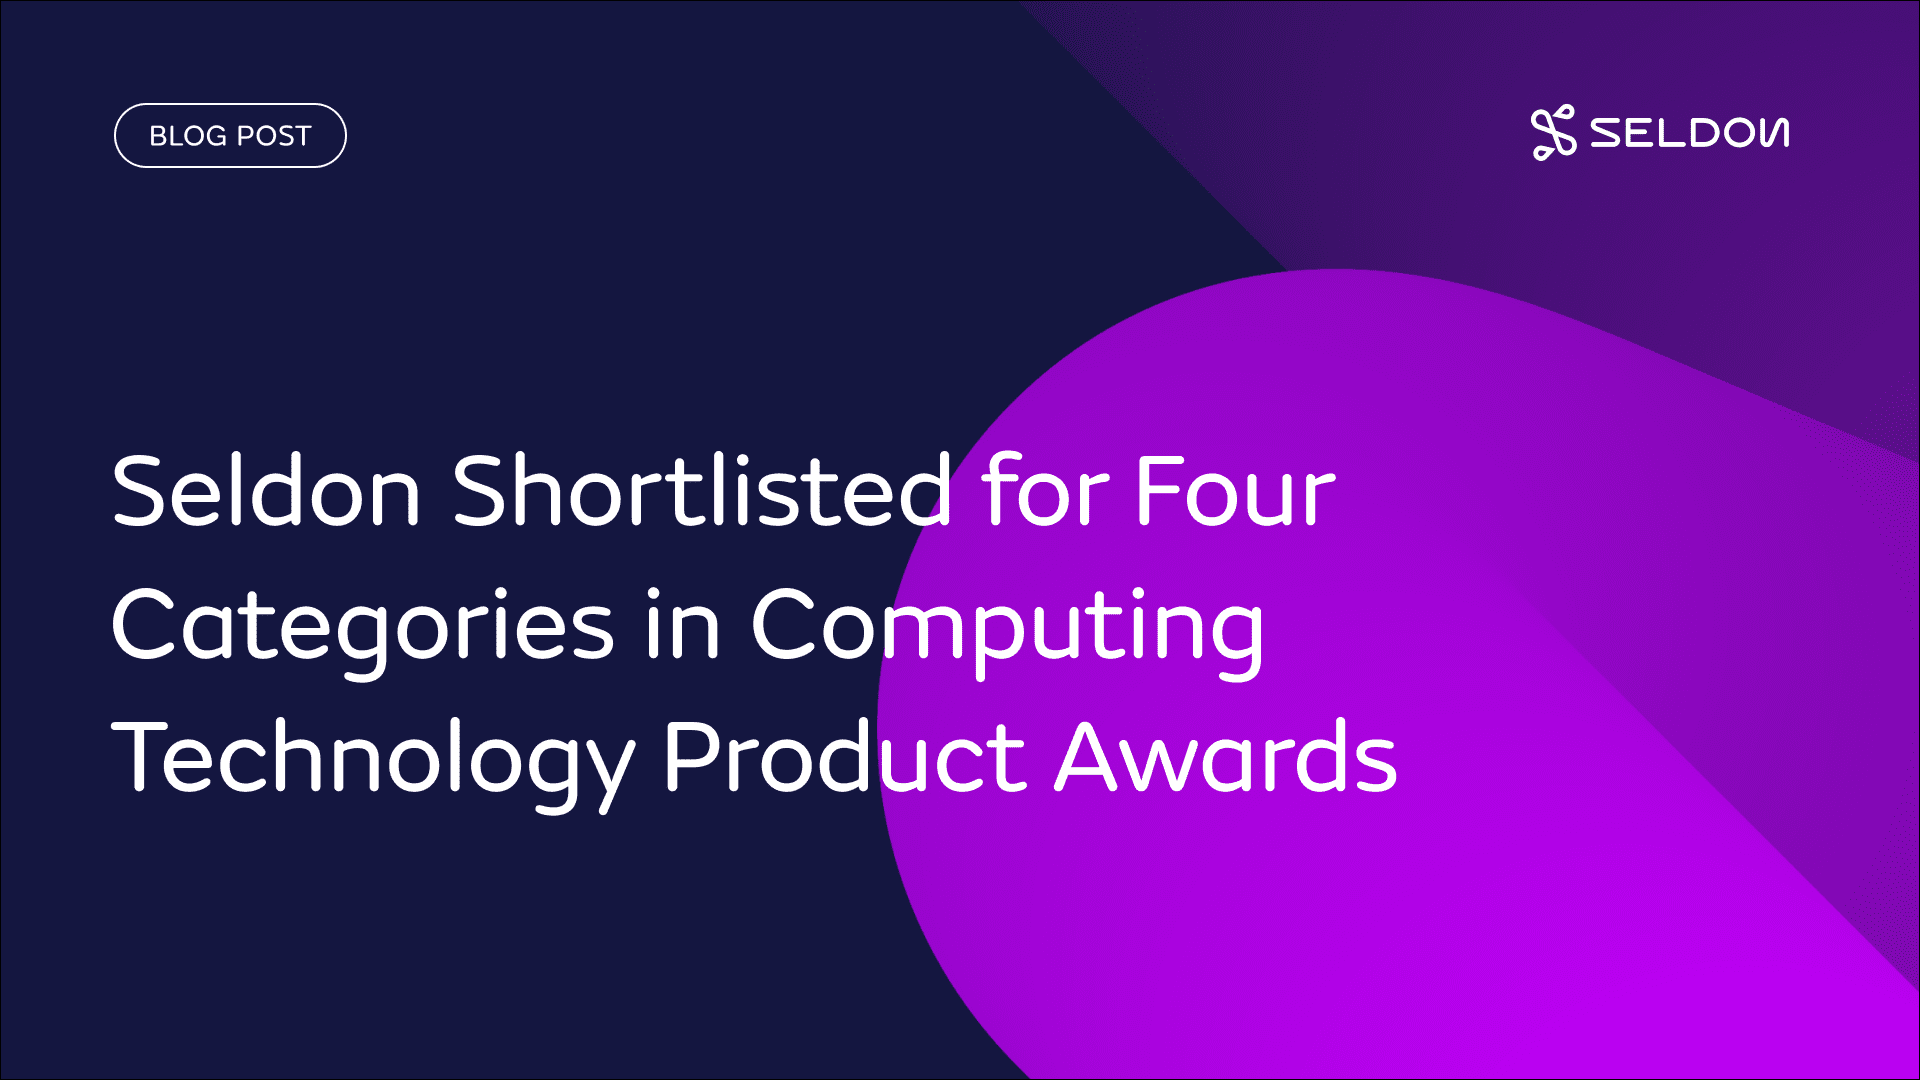 Seldon Shortlisted for Four Categories in Computing Technology Product Awards